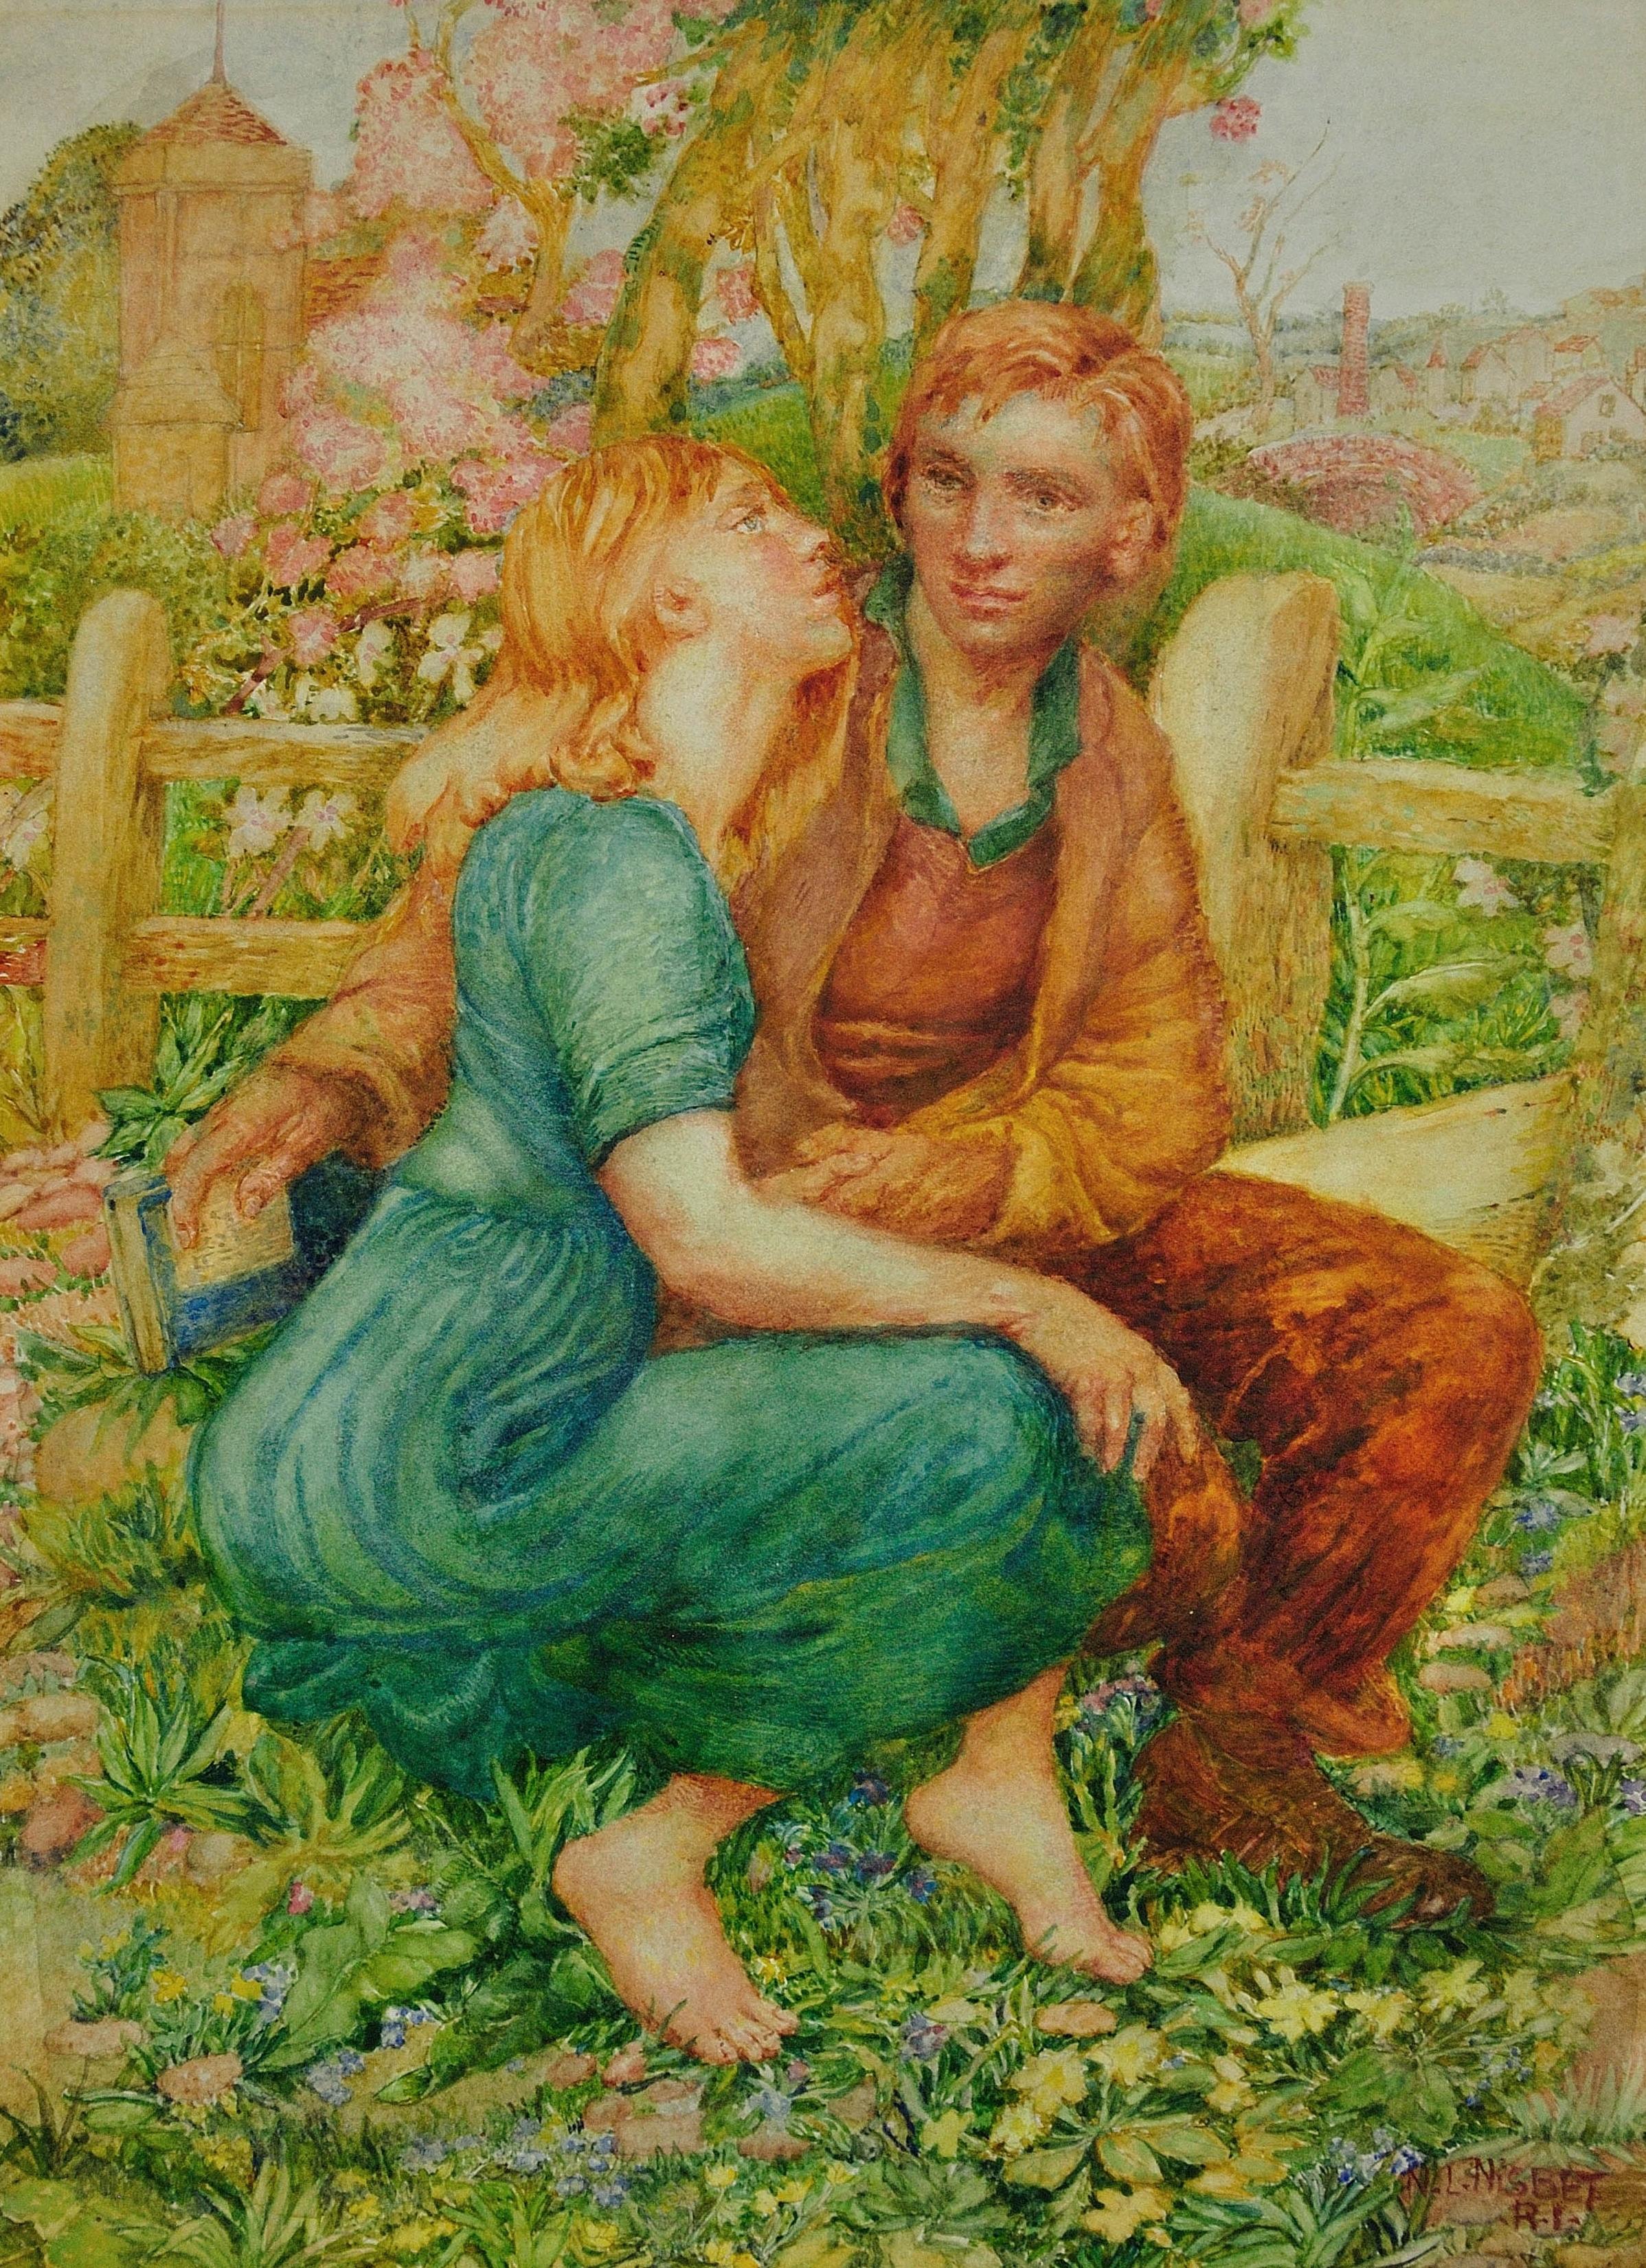 Such Young Love. The Anticipation of a Kiss. Last of the Pre-Raphaelites. - Art by Noel Laura Nisbet